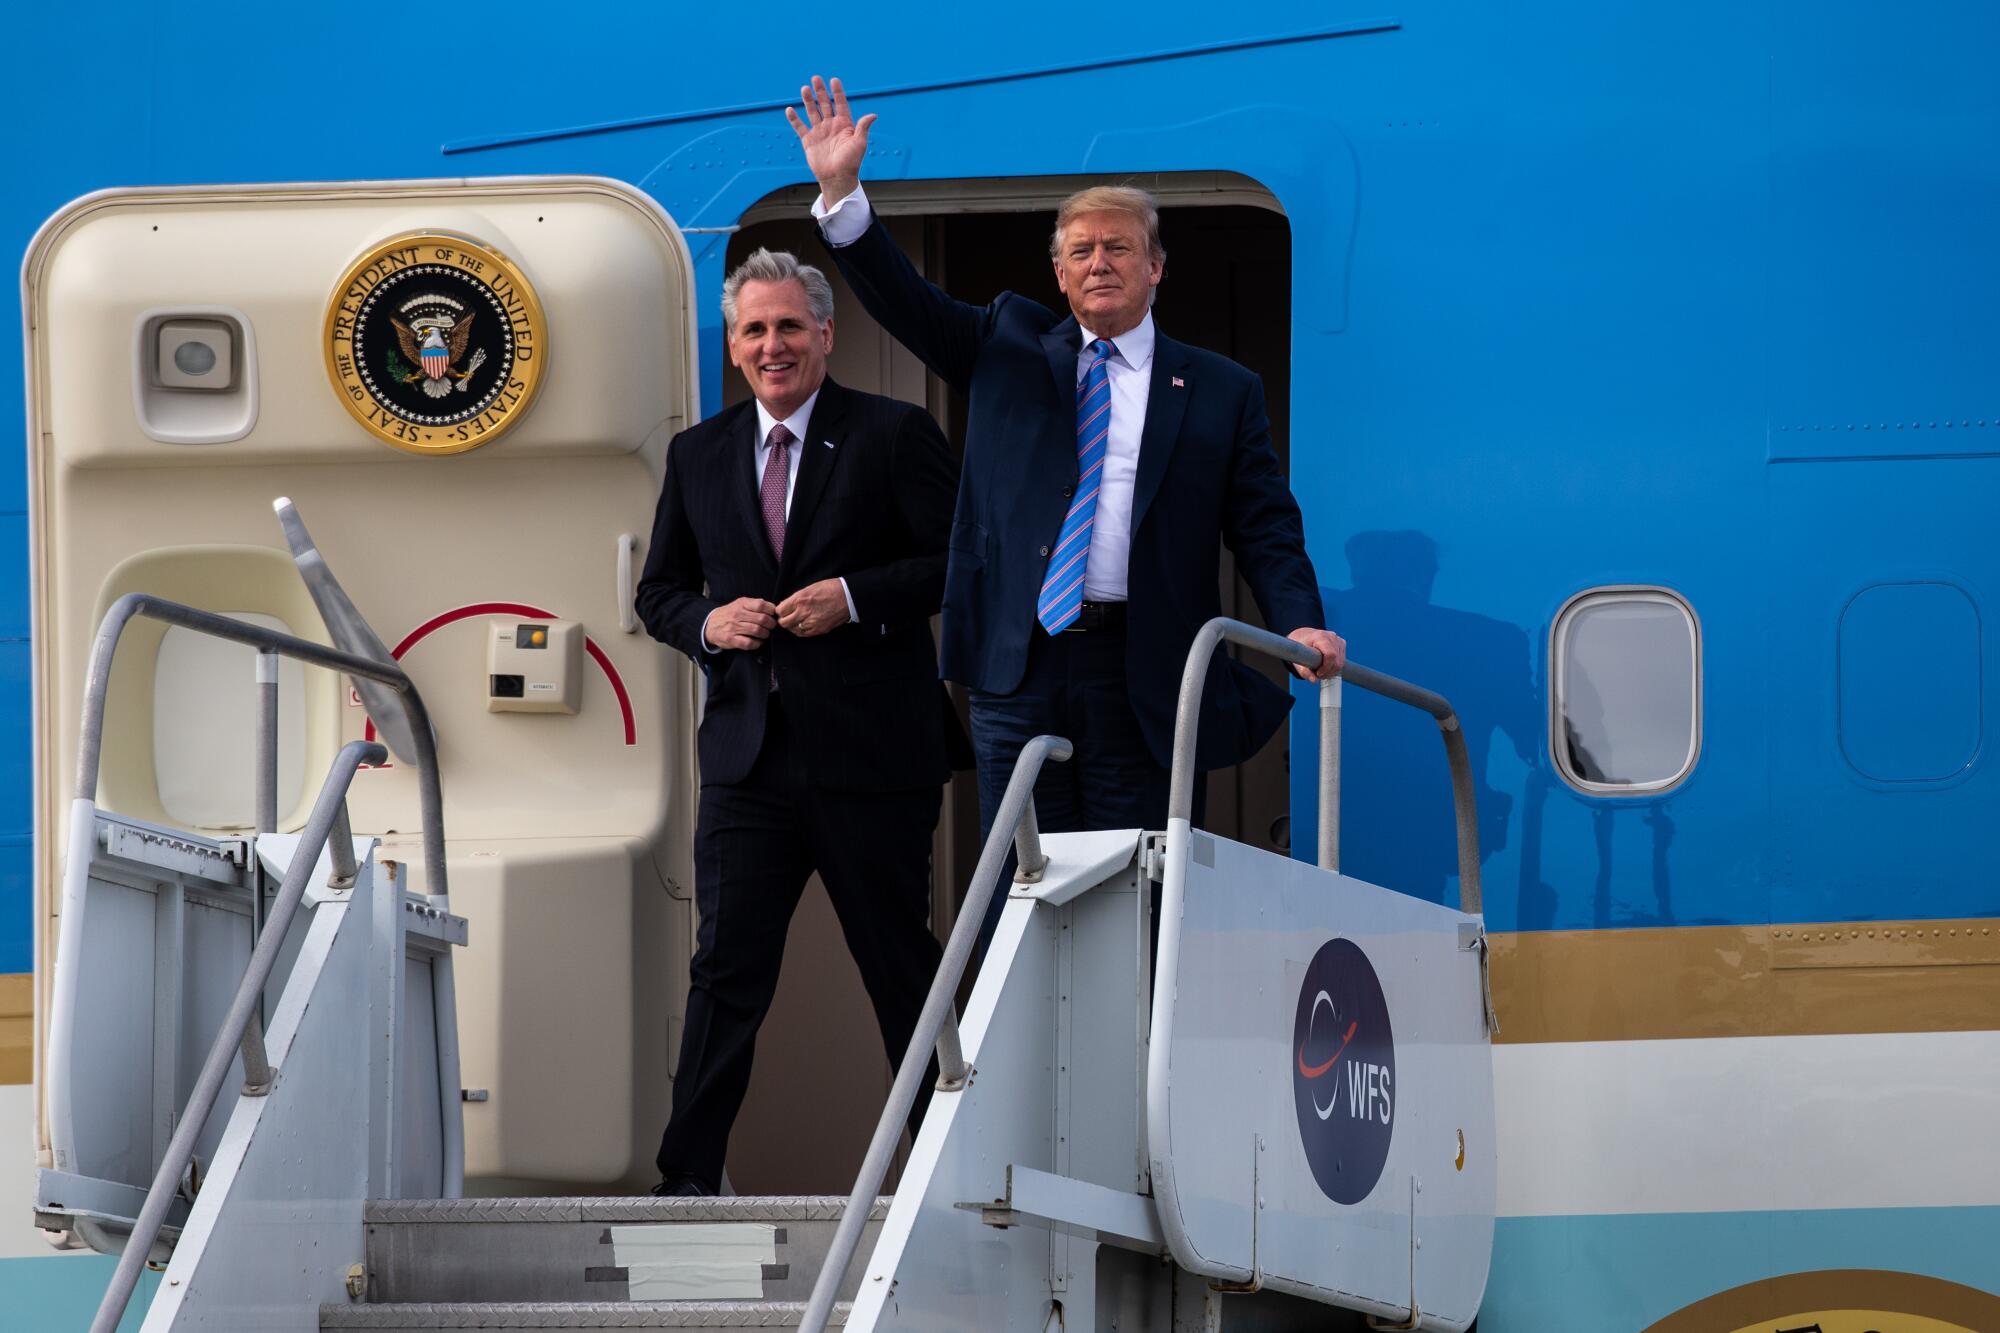 Then-President Trump and Rep. Kevin McCarthy disembark from an airplane.